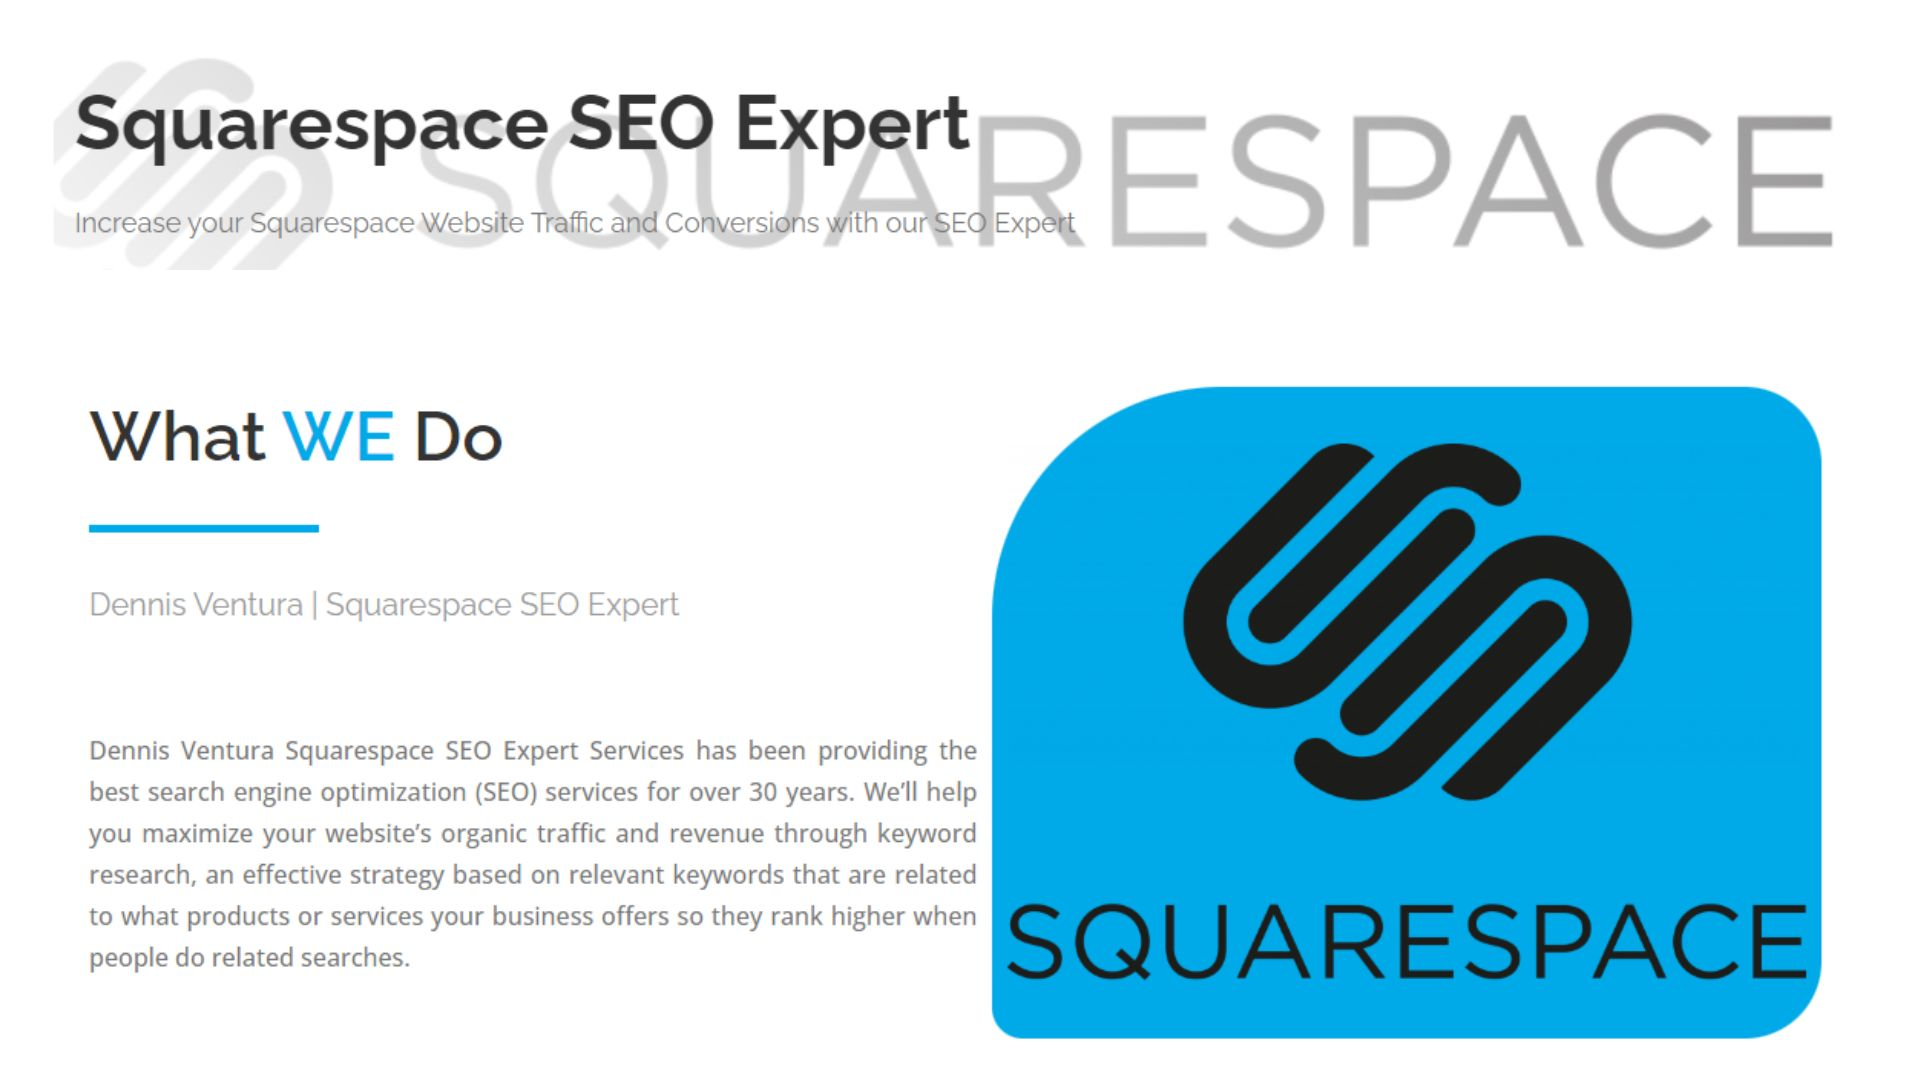 What Are The Benefits Of Using Squarespace SEO Tool?